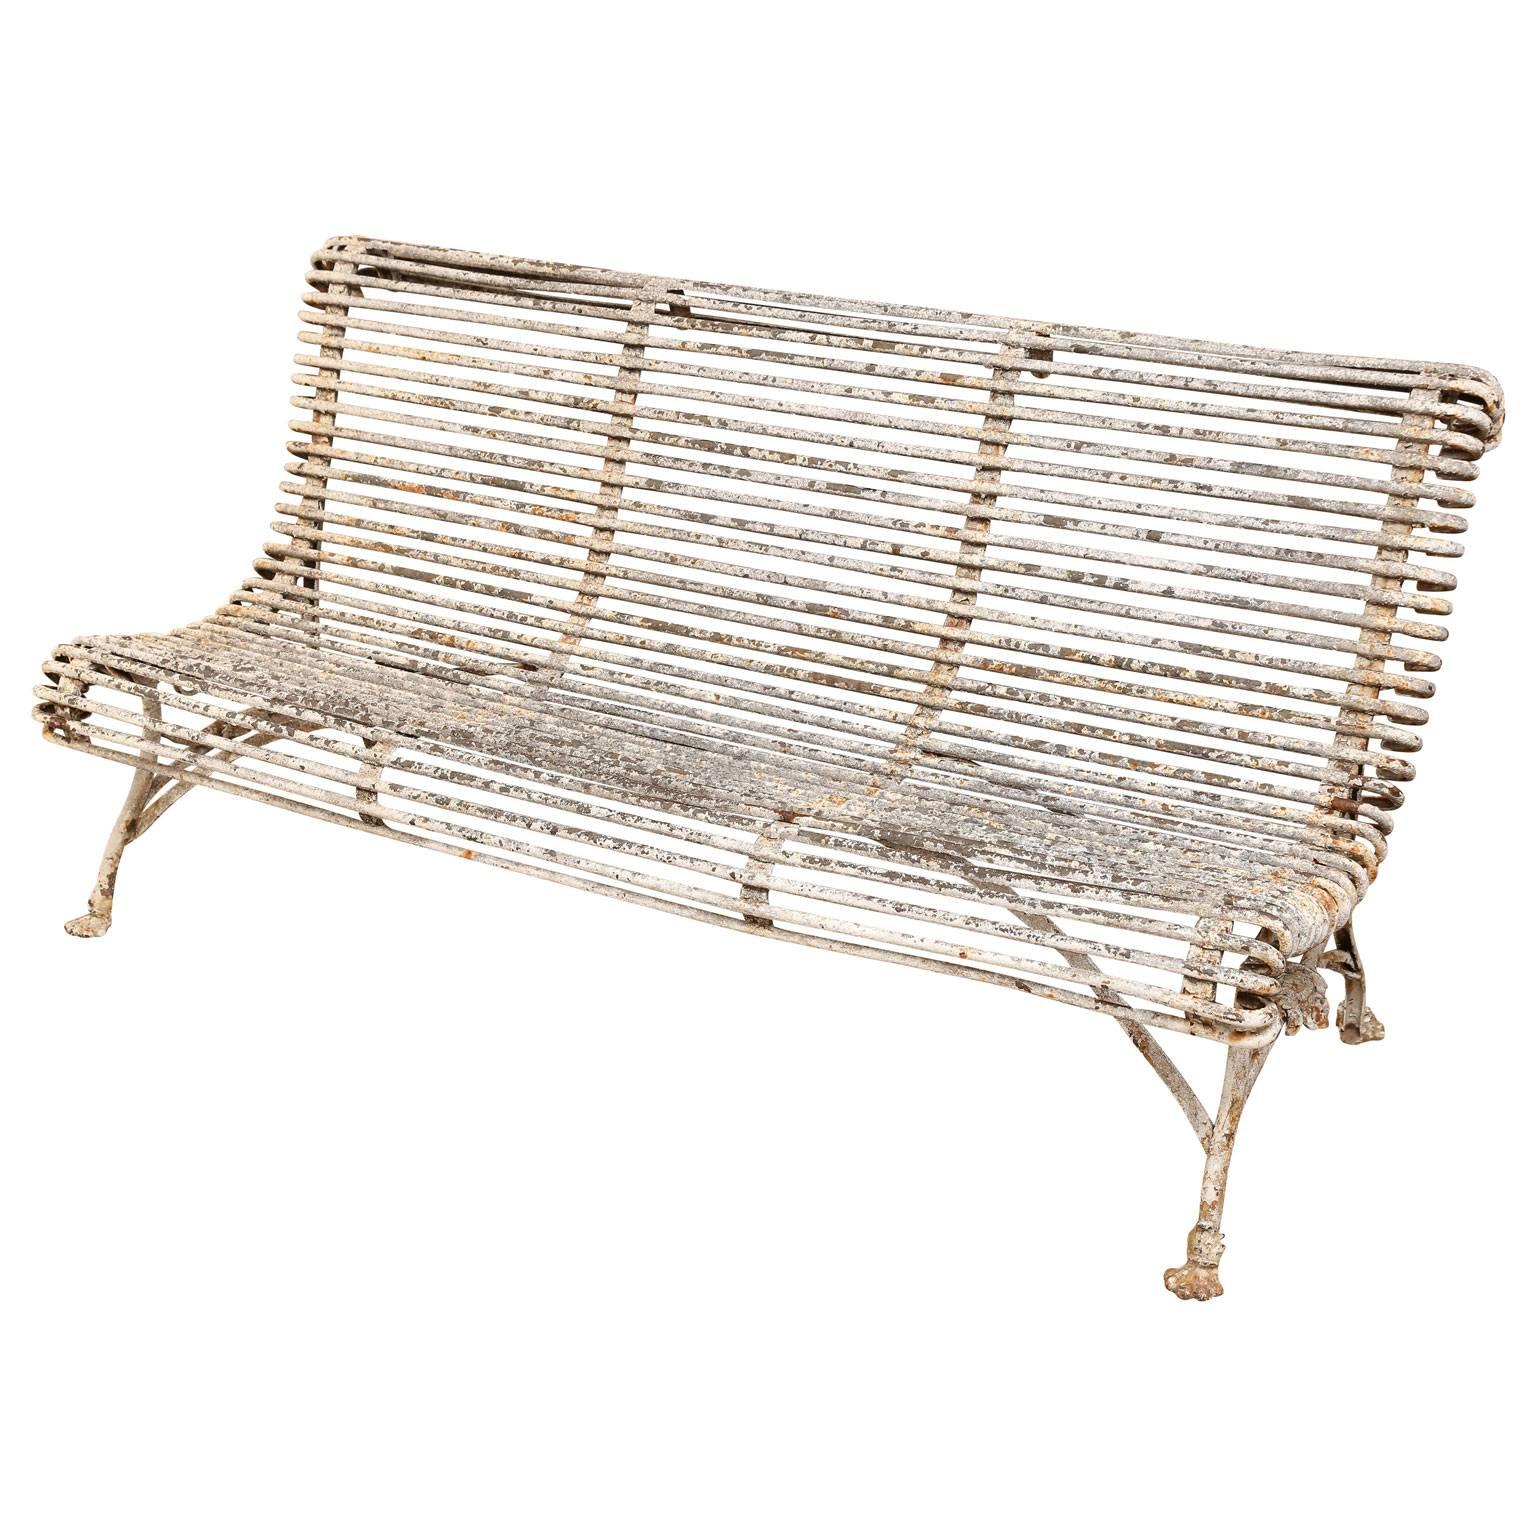 Early 20th century French white painted iron garden bench by Arras.